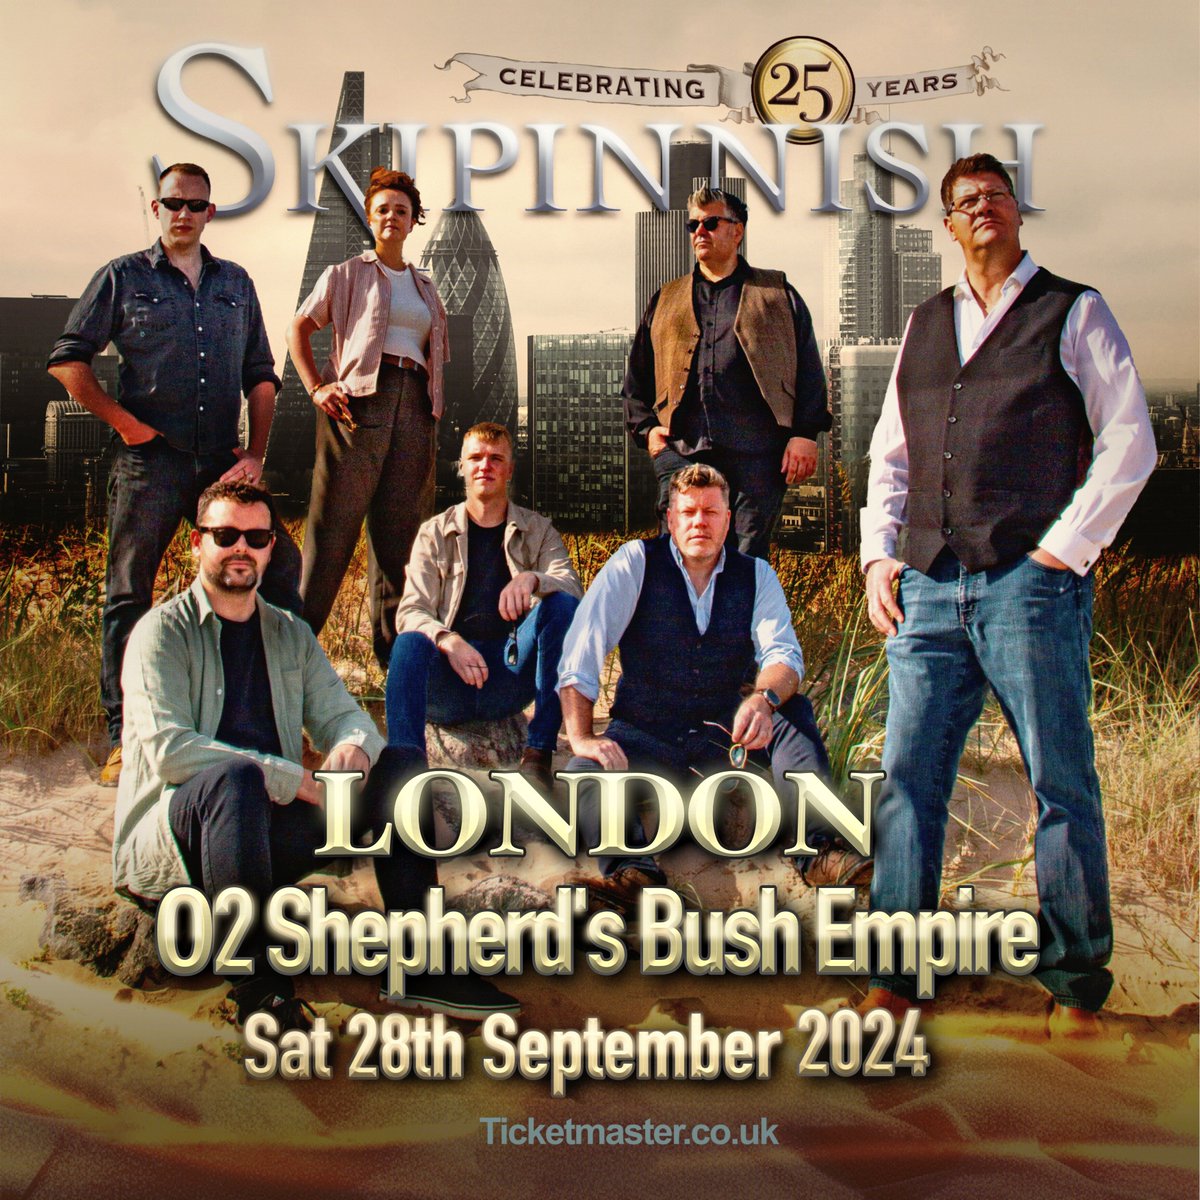 We’ve got Priority Tickets for one of Scotland's most beloved traditional music bands, @Skipinnish, on sale now! Head to #O2Priority 👉 amg-venues.com/Vp5150QPWxr #Skipinnish